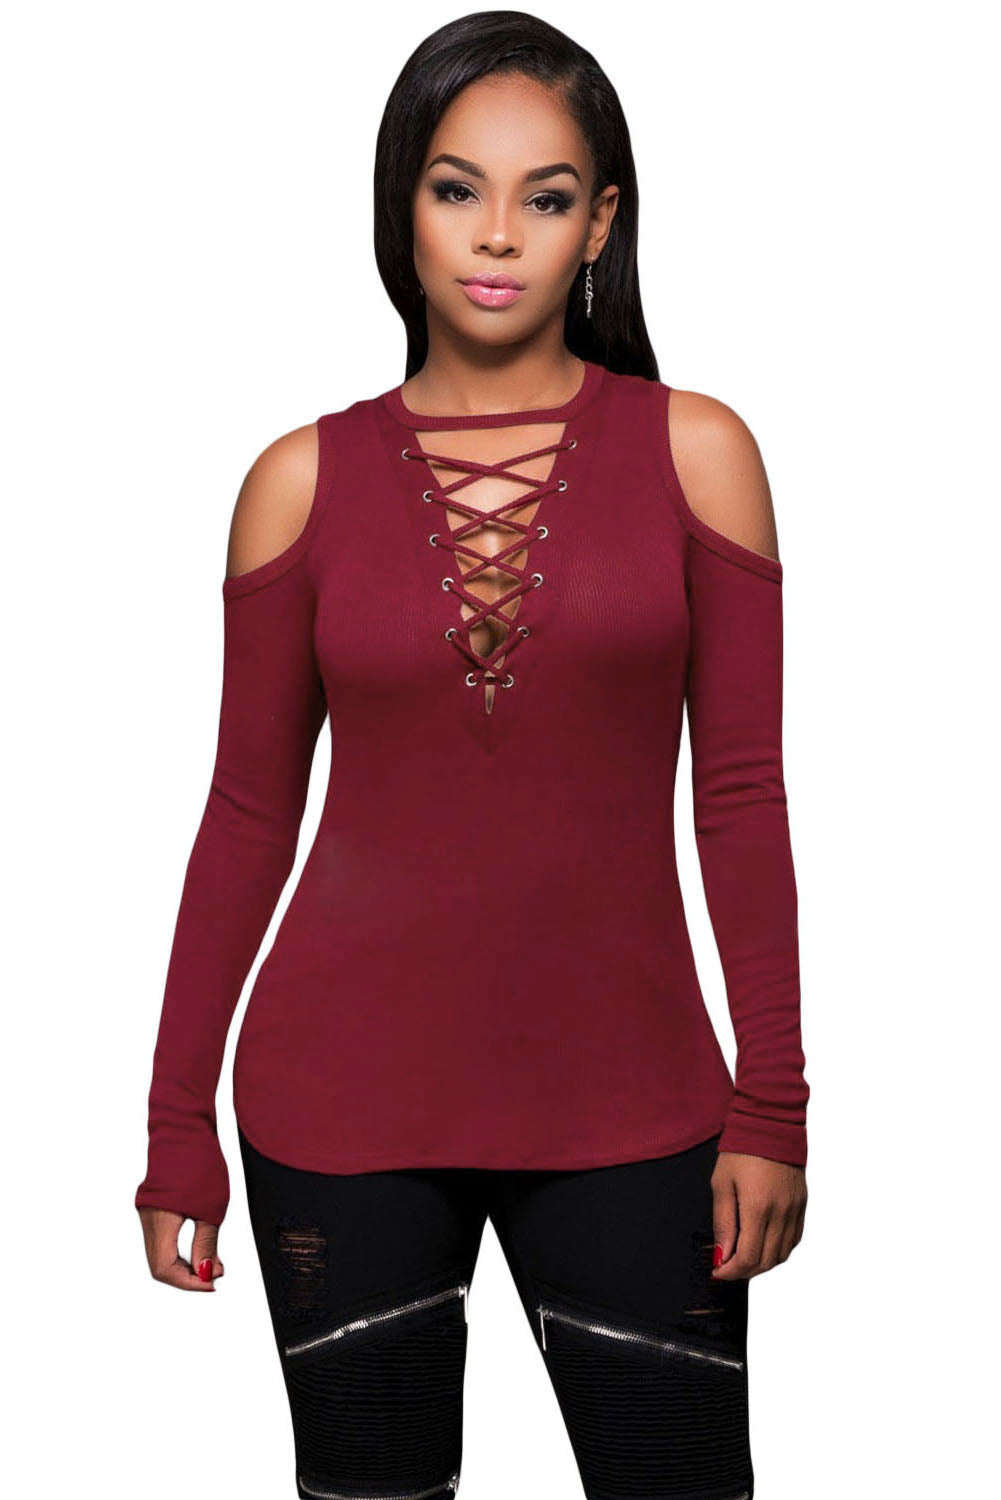 Burgundy Long Sleeve Cut-out Shoulder Ribbed Top as shown Polyester+Spandex Long Sleeve Tops JT's Designer Fashion